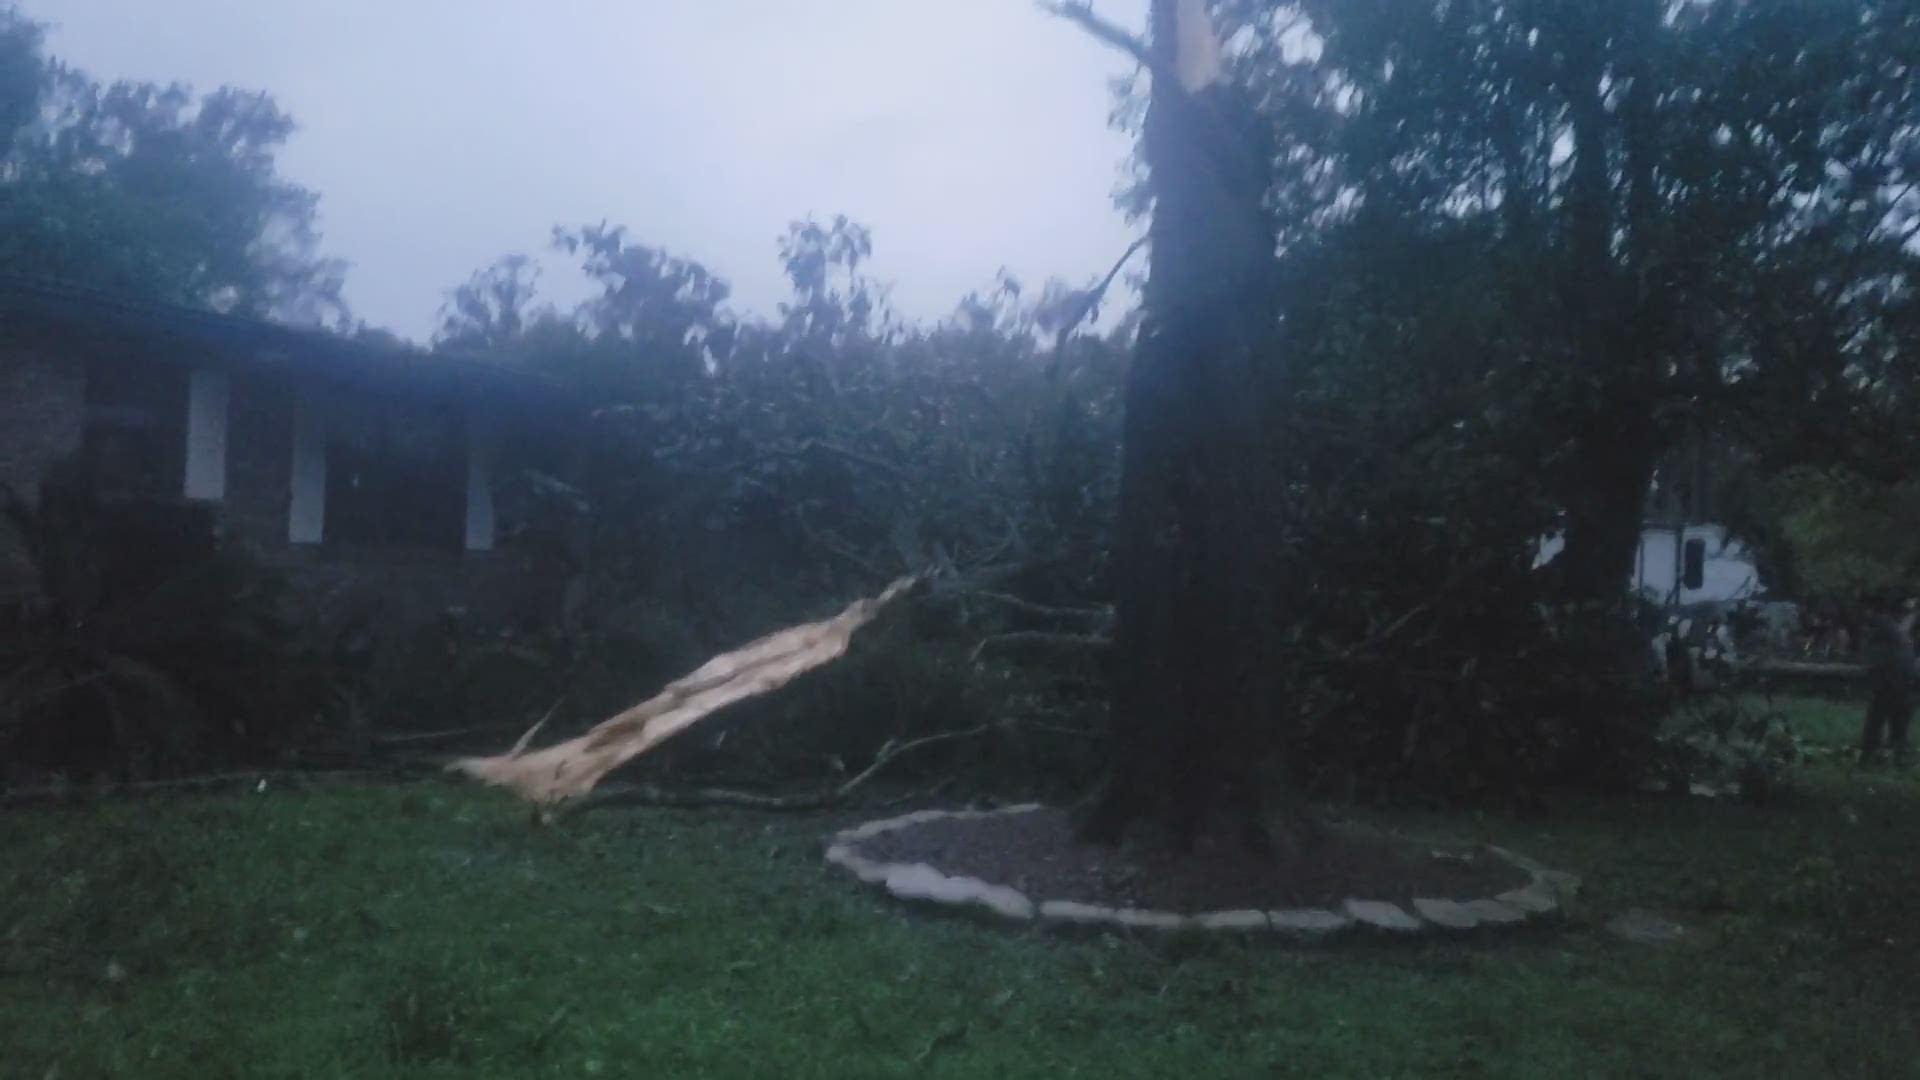 The storm caused several trees to fall as heavy rains and winds mixed with an already saturated ground.
Credit: Dawn White